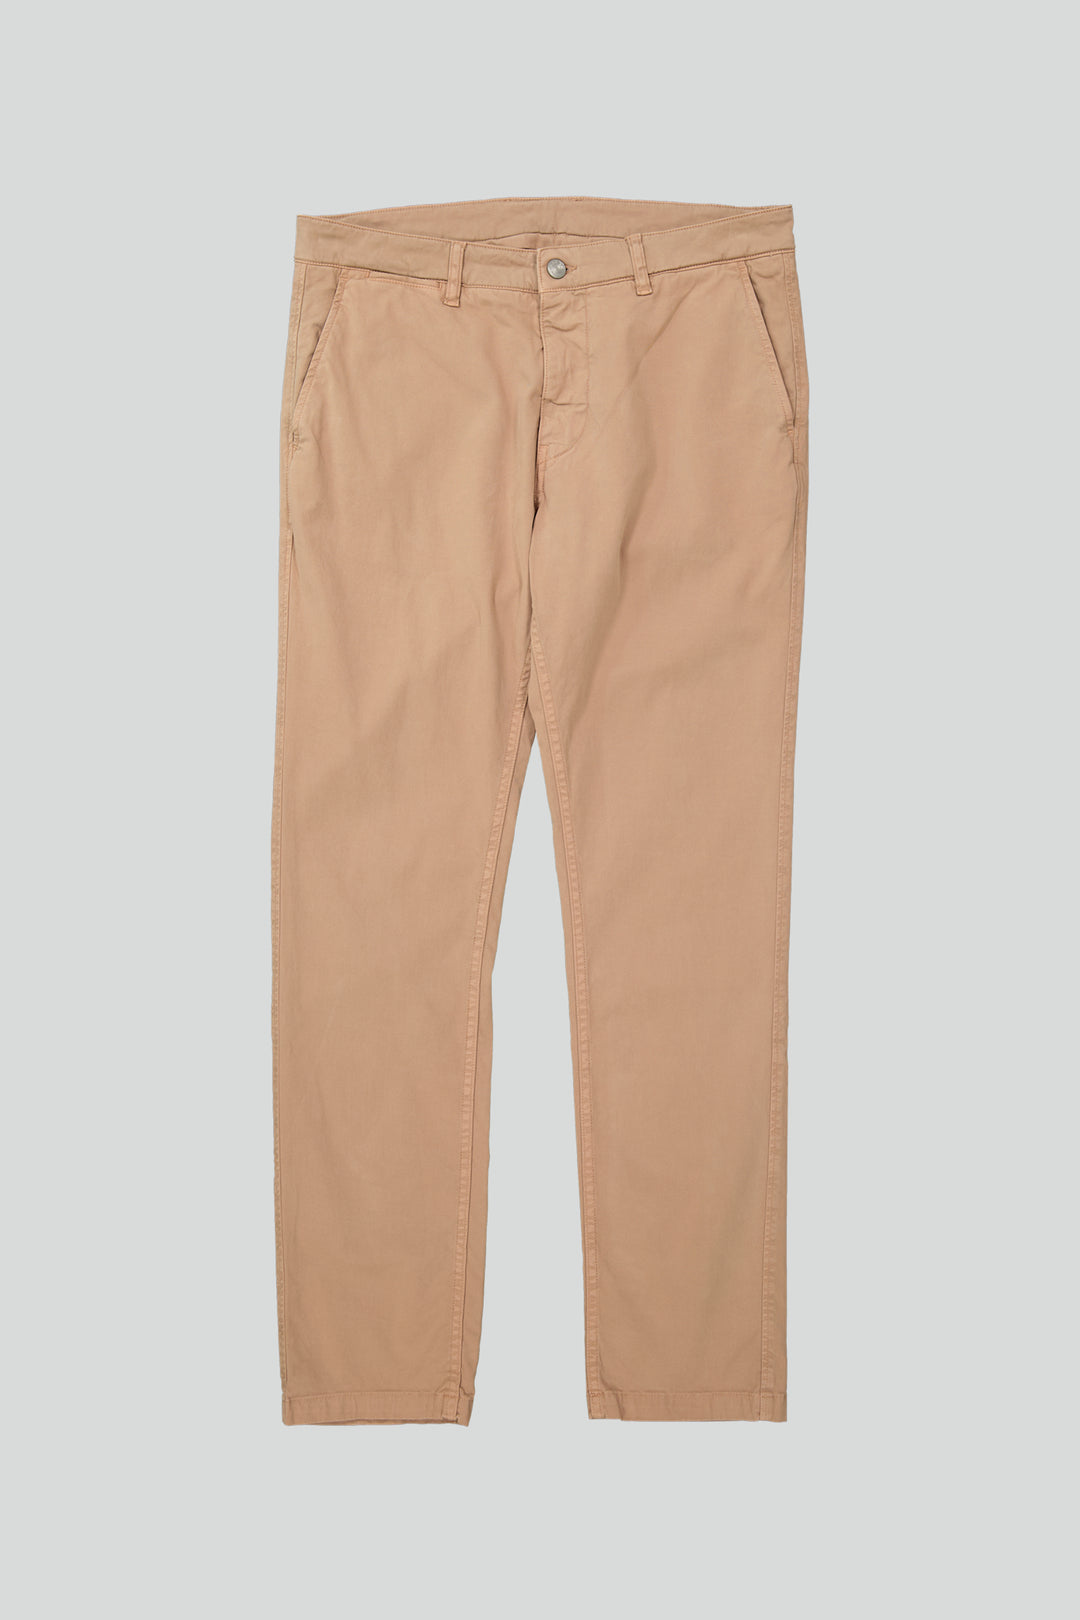 NN07 - Marco 1400 Classic Chino in Nougat | Buster McGee